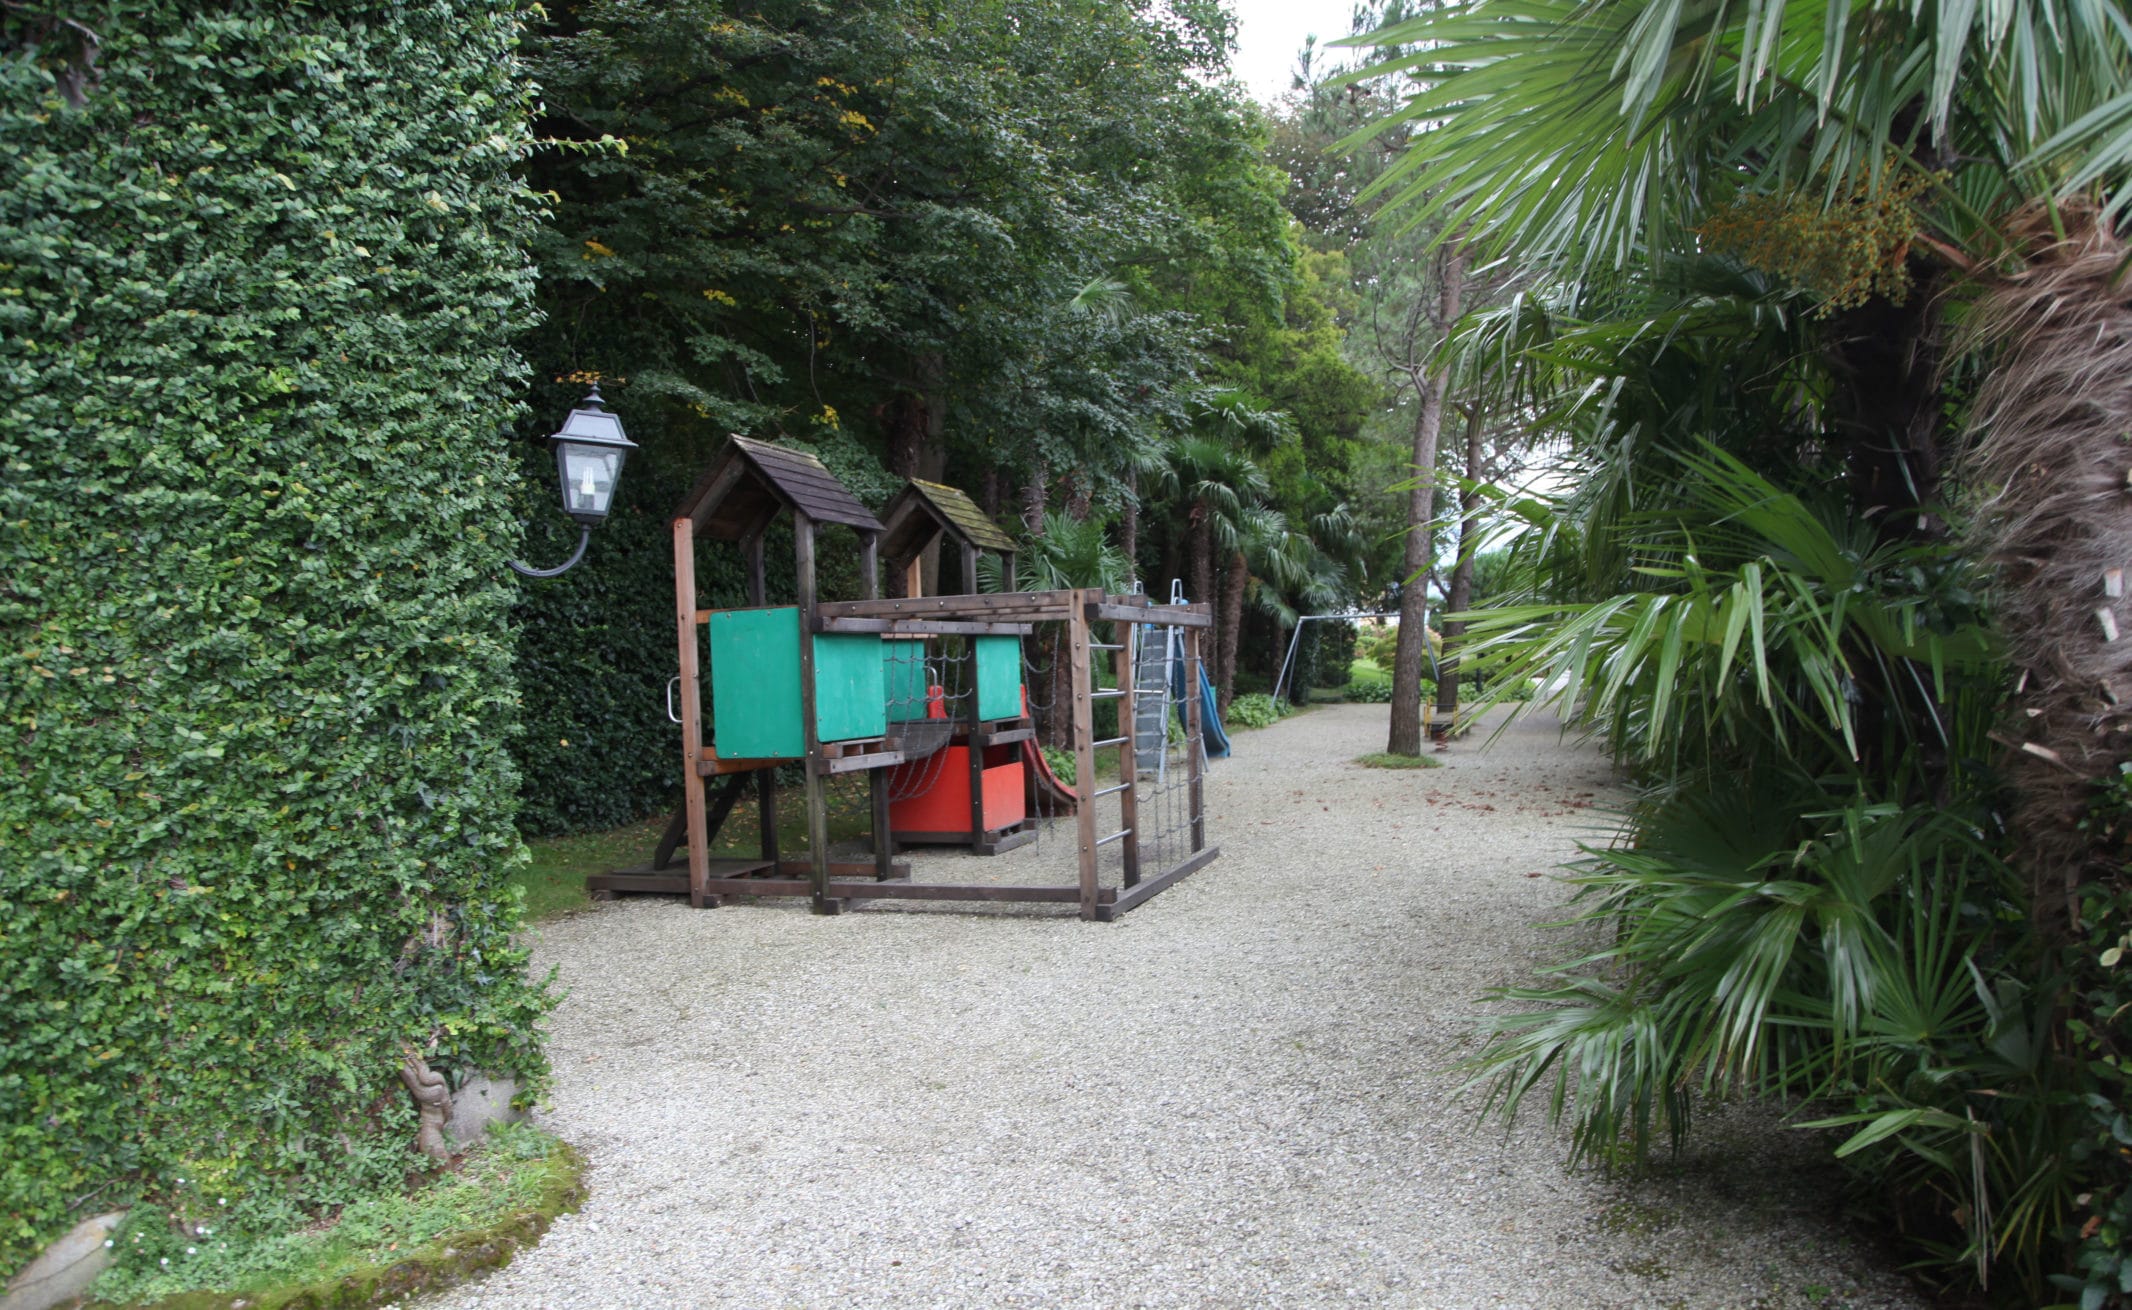 The playground nestled in the garden